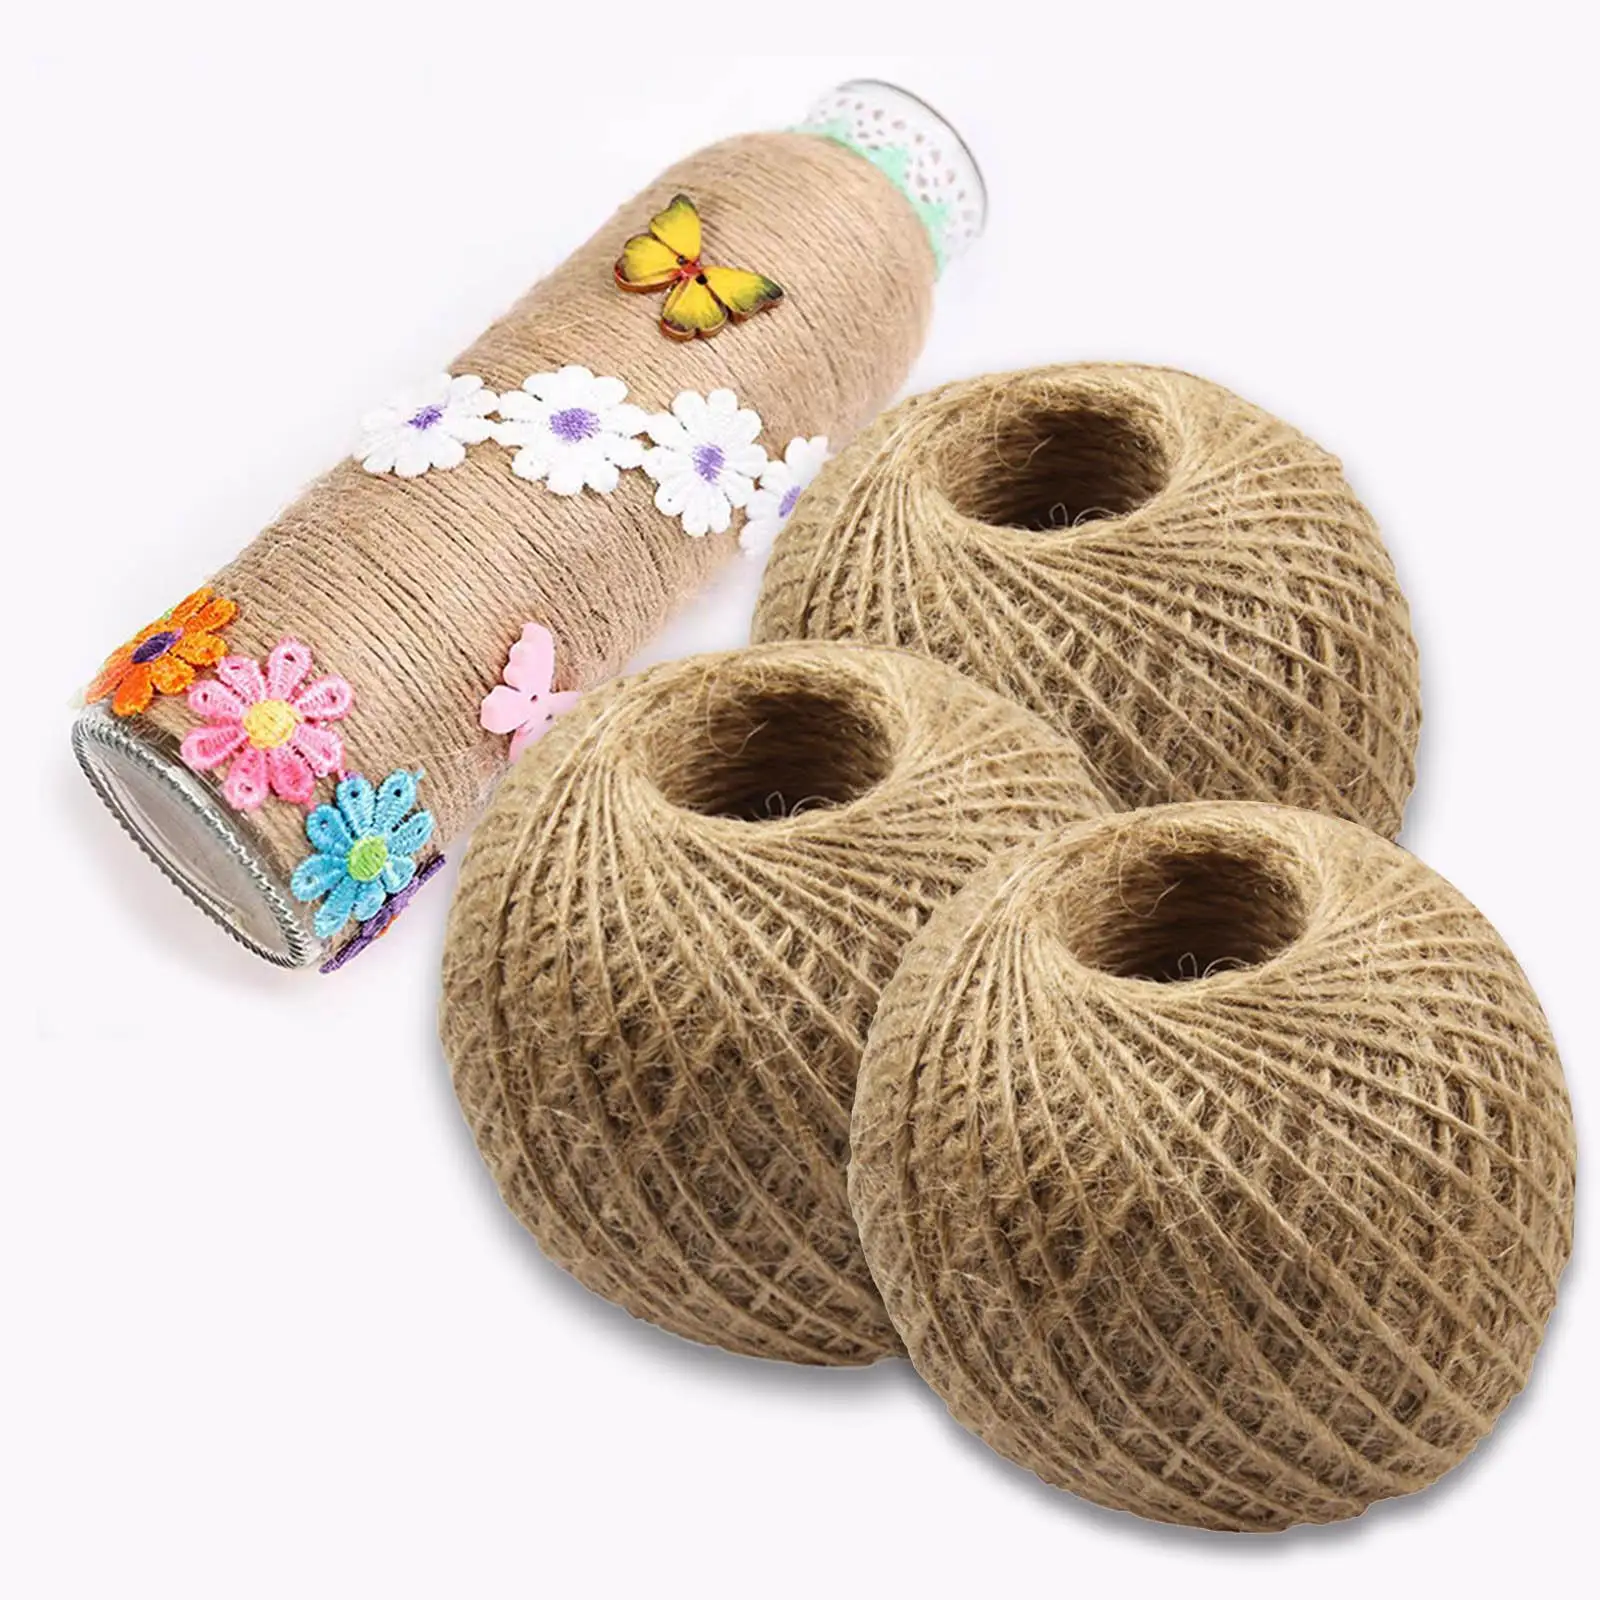 3x Burlap String Roll 80M for Bakers Twine Industrial Packing Materials Bakery Boxes Wrapping Arts Crafts Butcher Twine